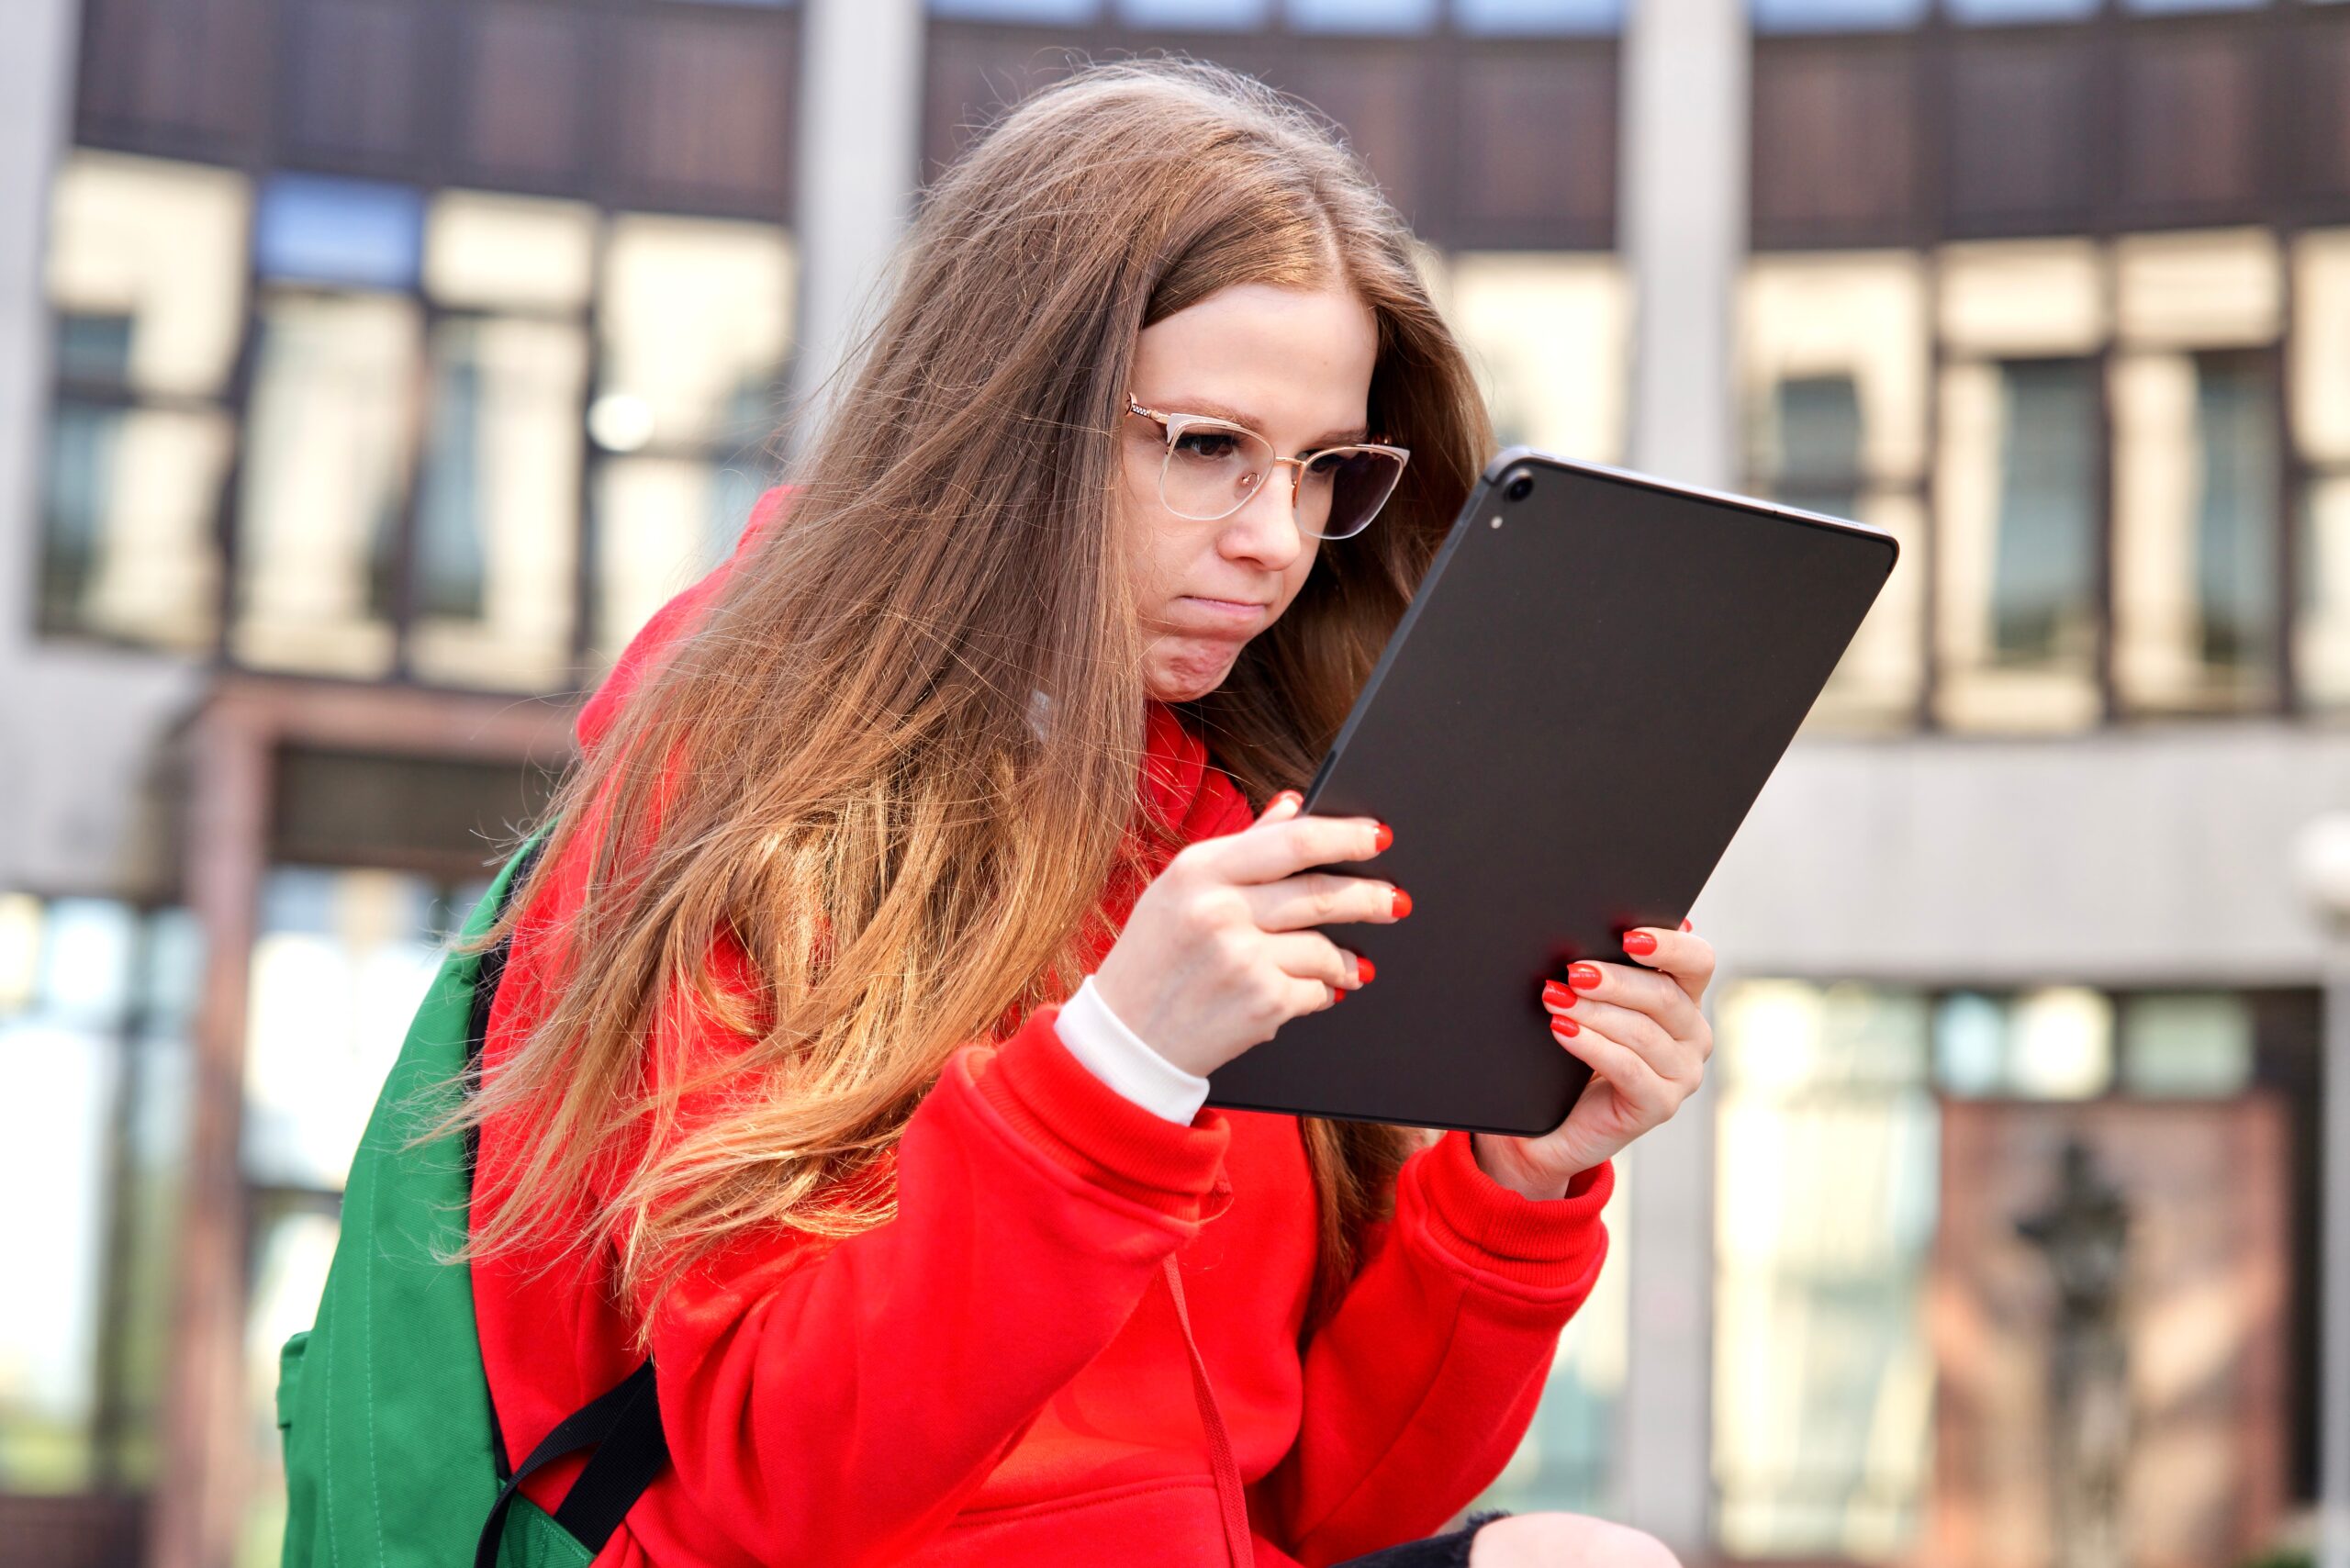 Young university student visibly upset at what she sees on her tablet